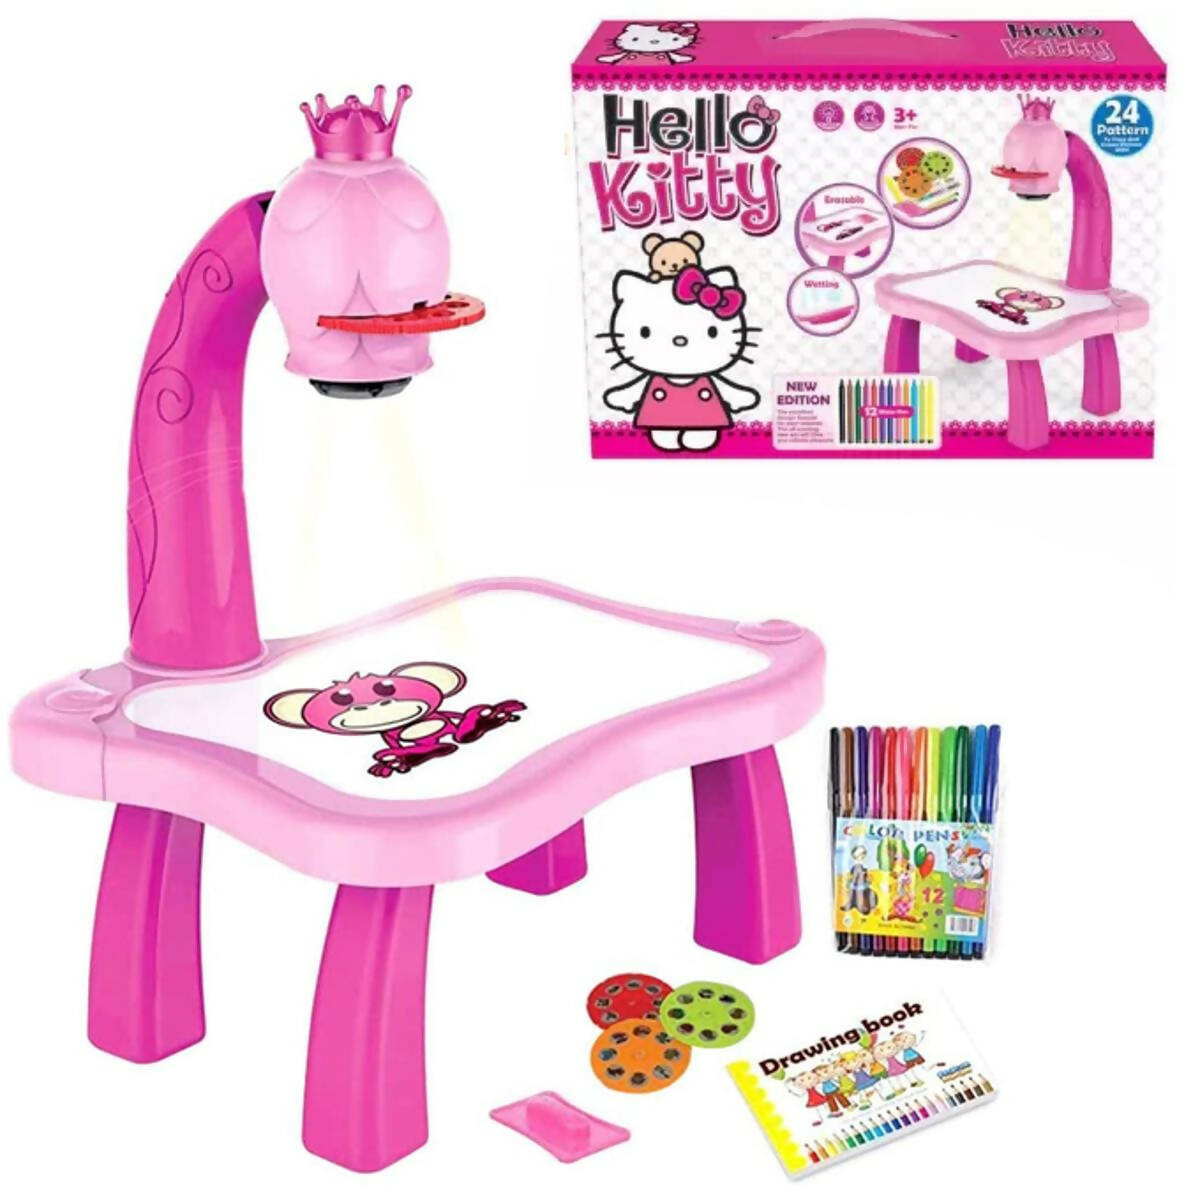 Hello Kitty Children Projection Drawing Board Led Projector - 24 Pattern